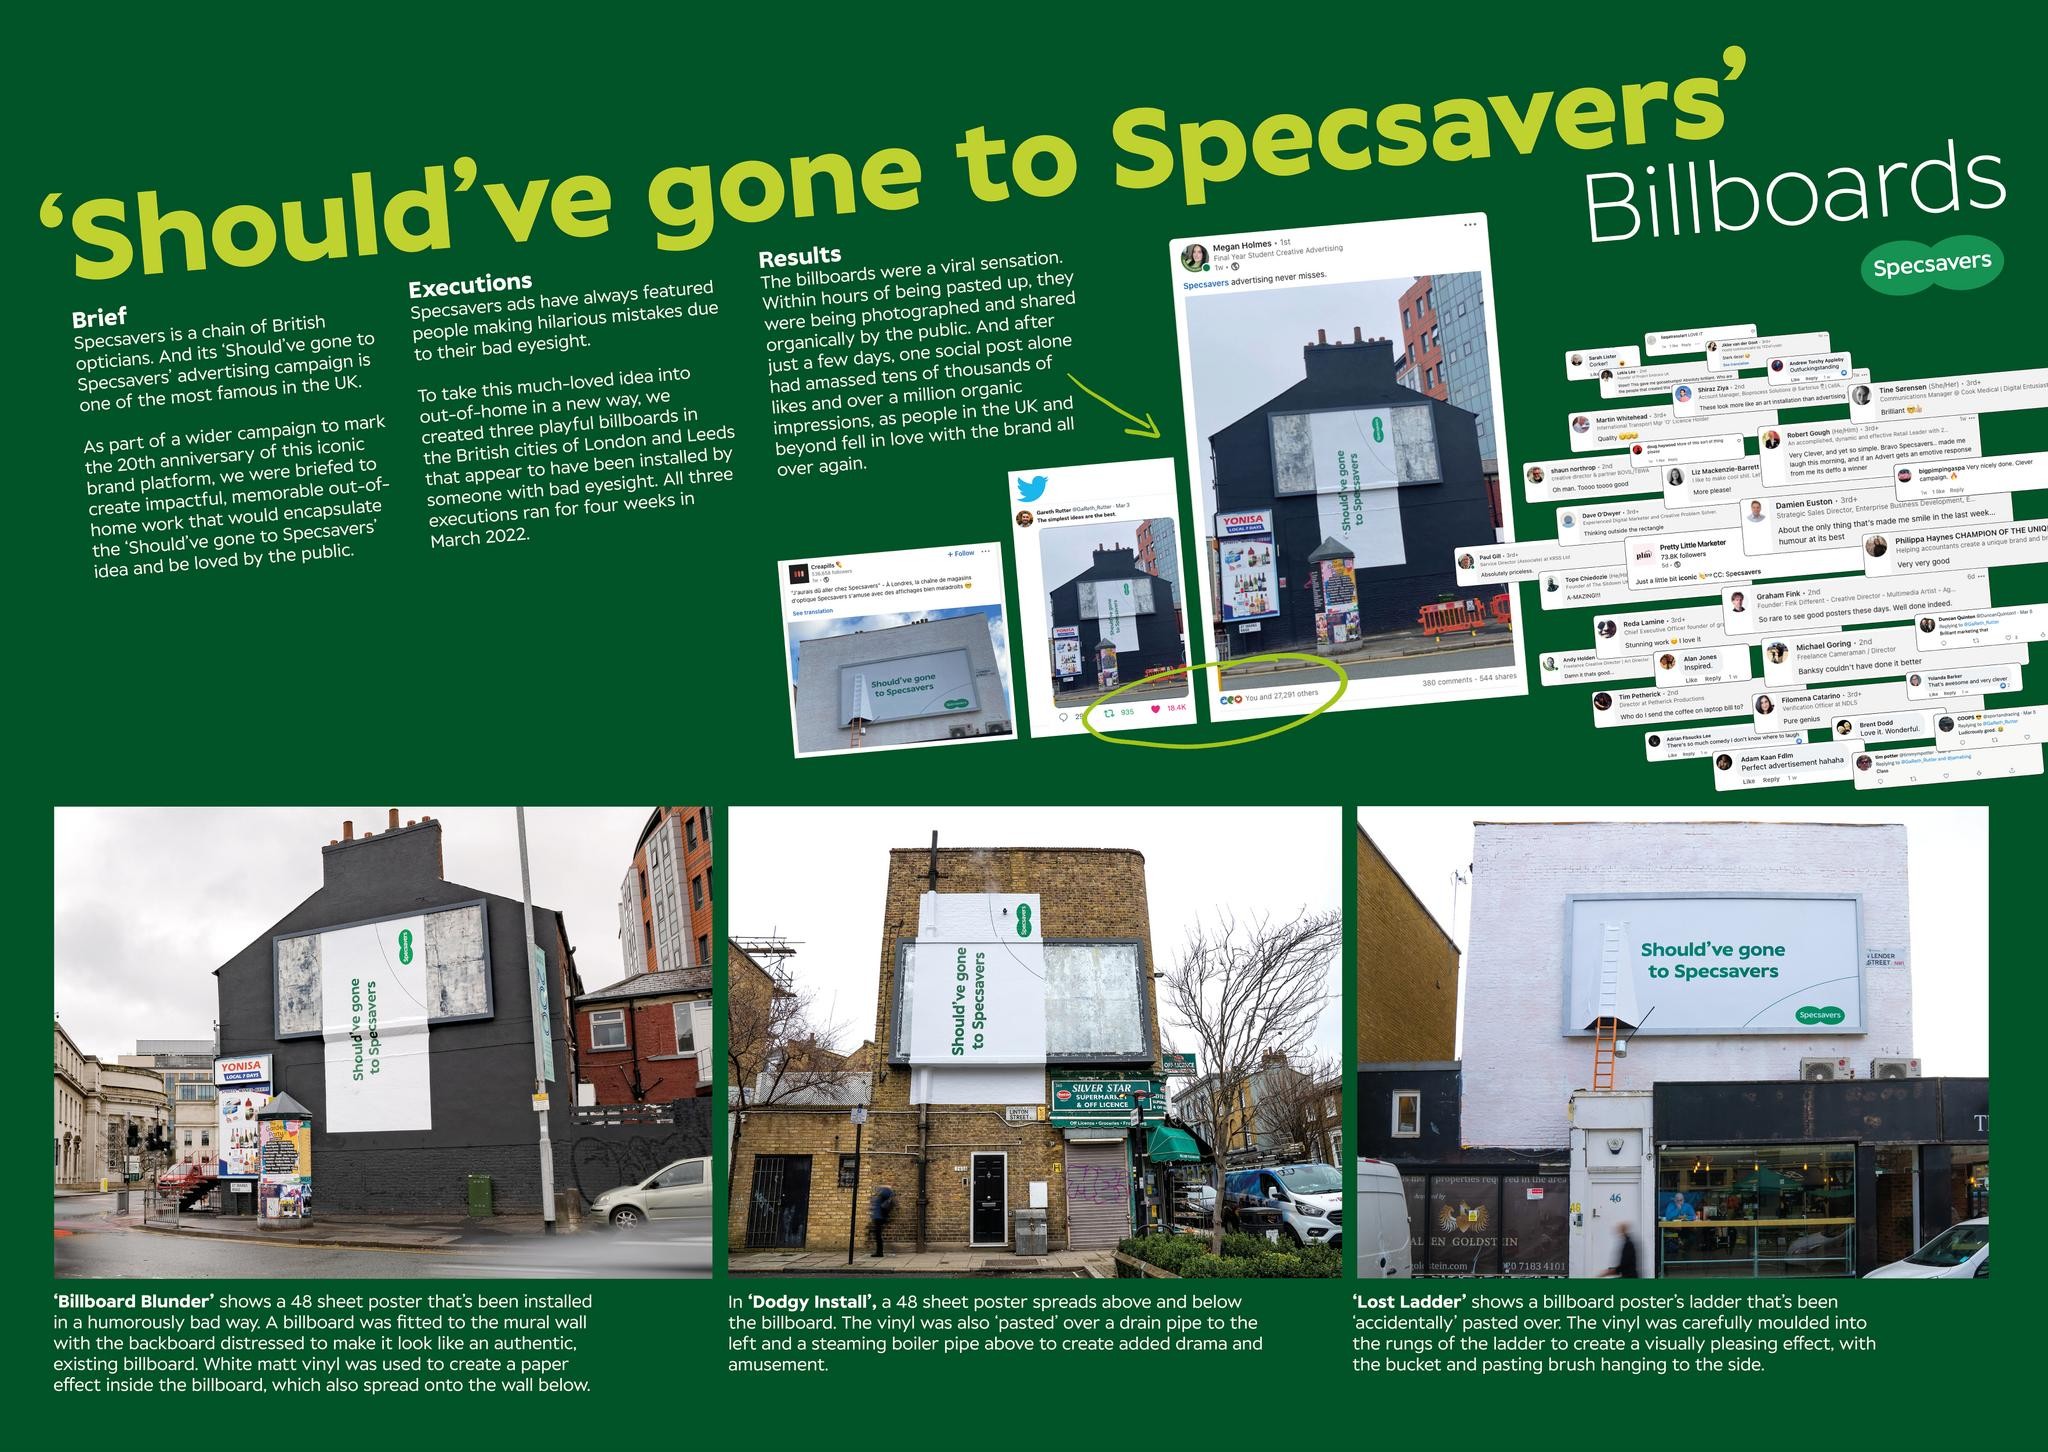 Should've gone to Specsavers Billboards